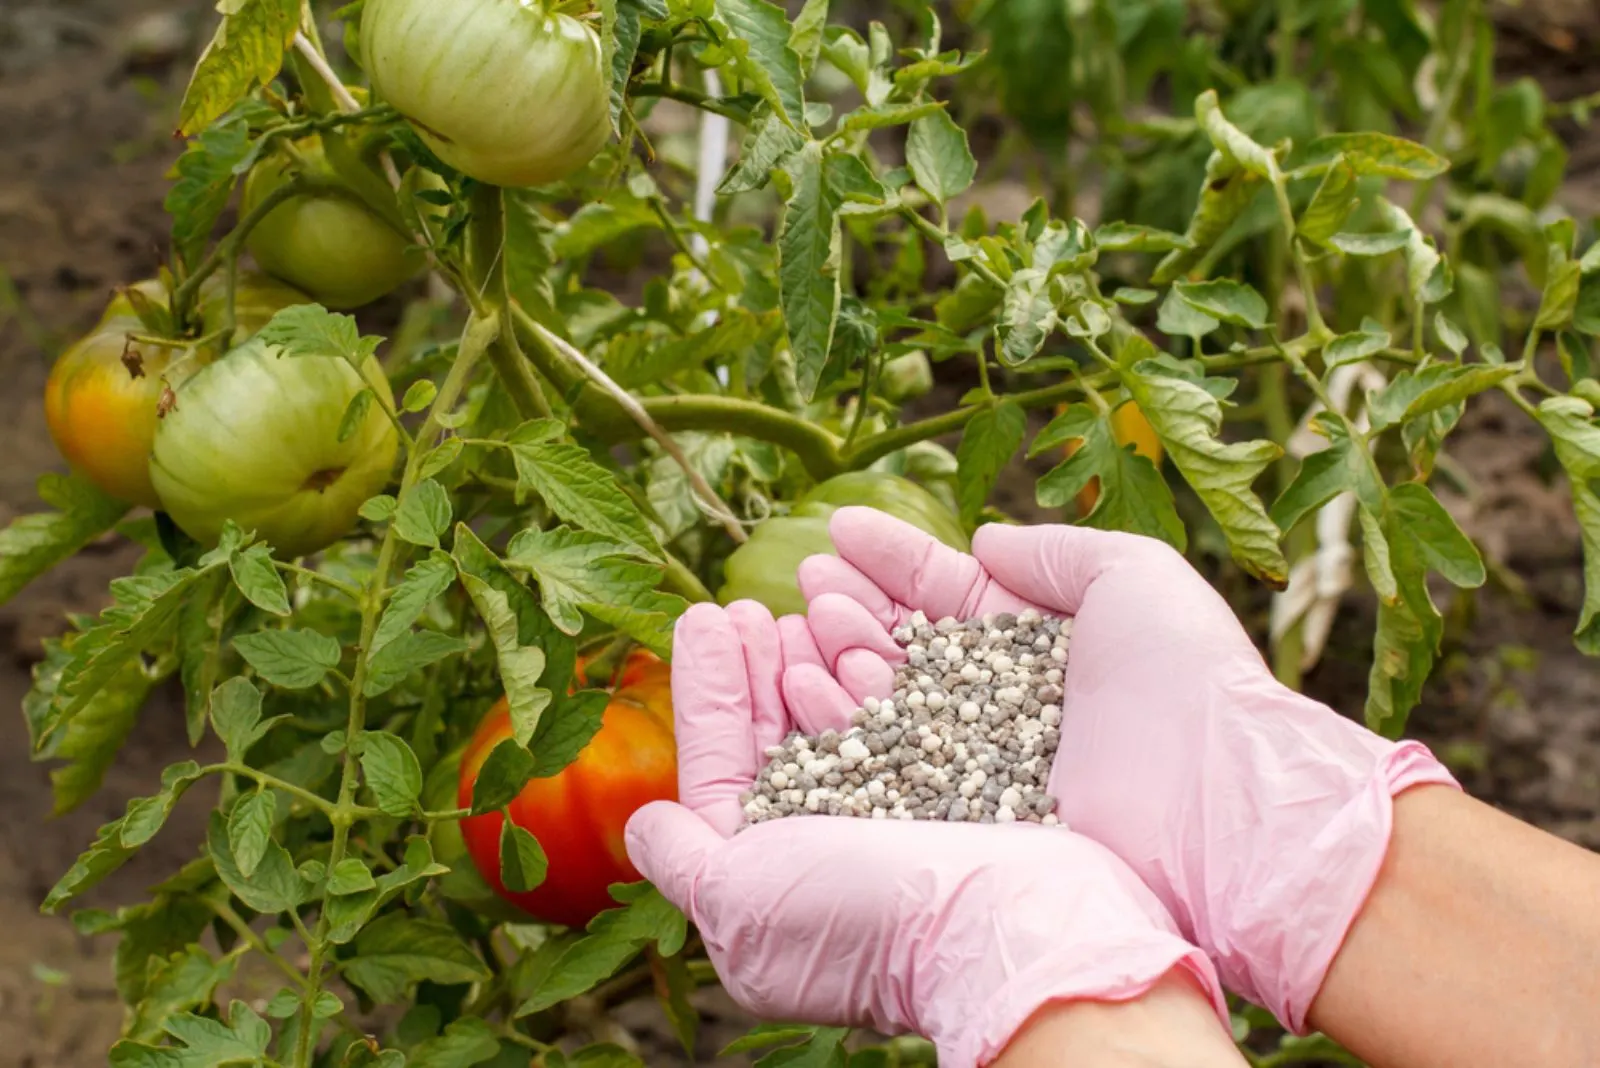 Farmer hands in rubber gloves holds chemical fertilizer to give it to tomato bushes